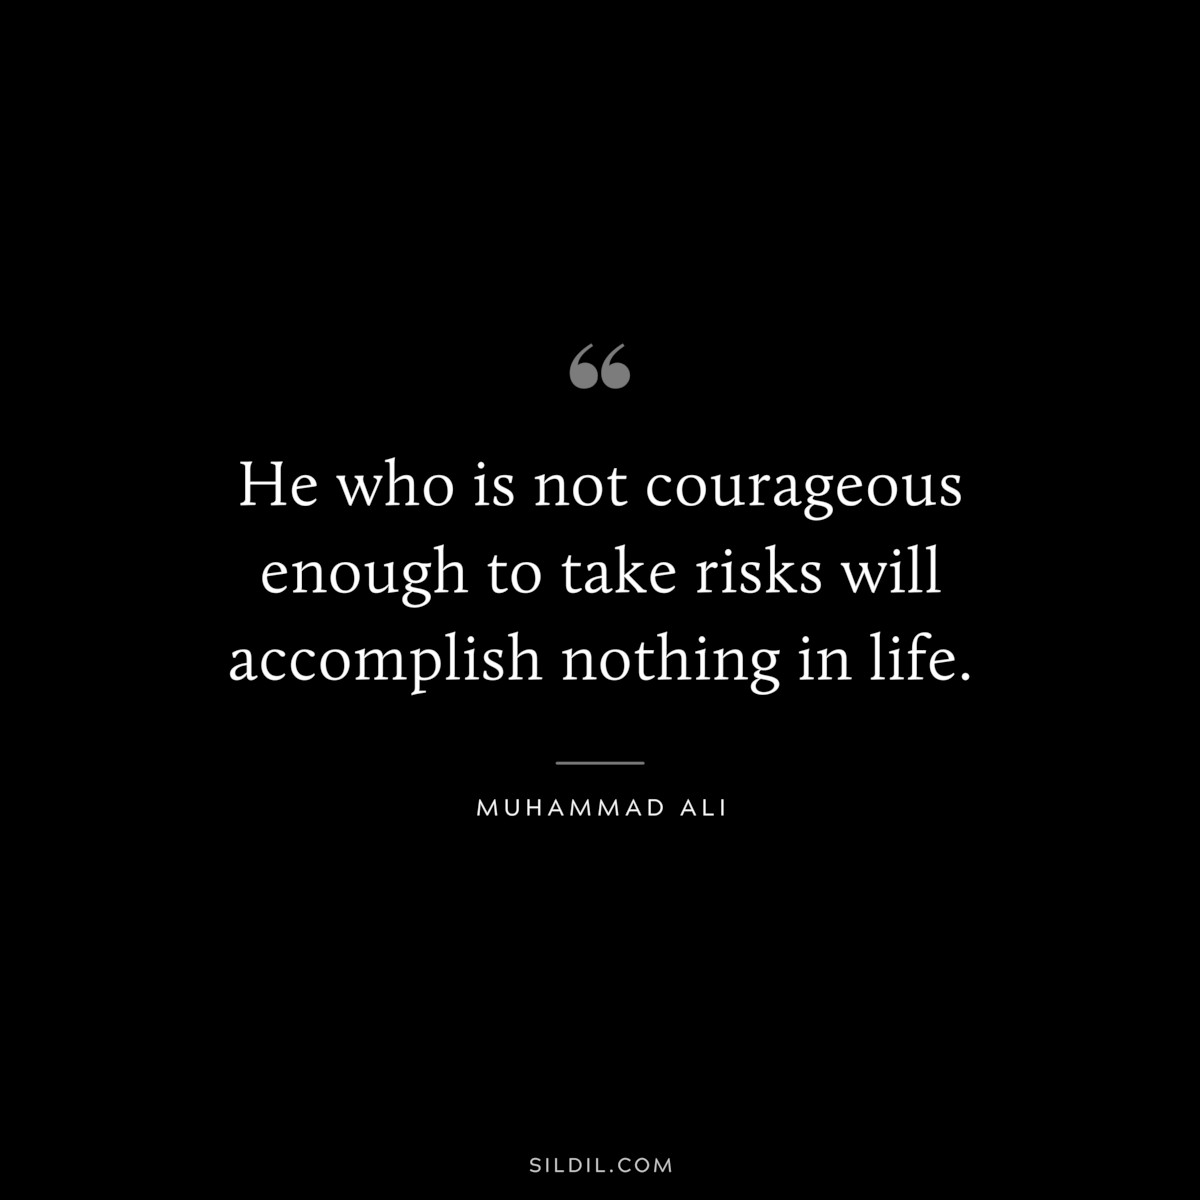 He who is not courageous enough to take risks will accomplish nothing in life. ― Muhammad Ali